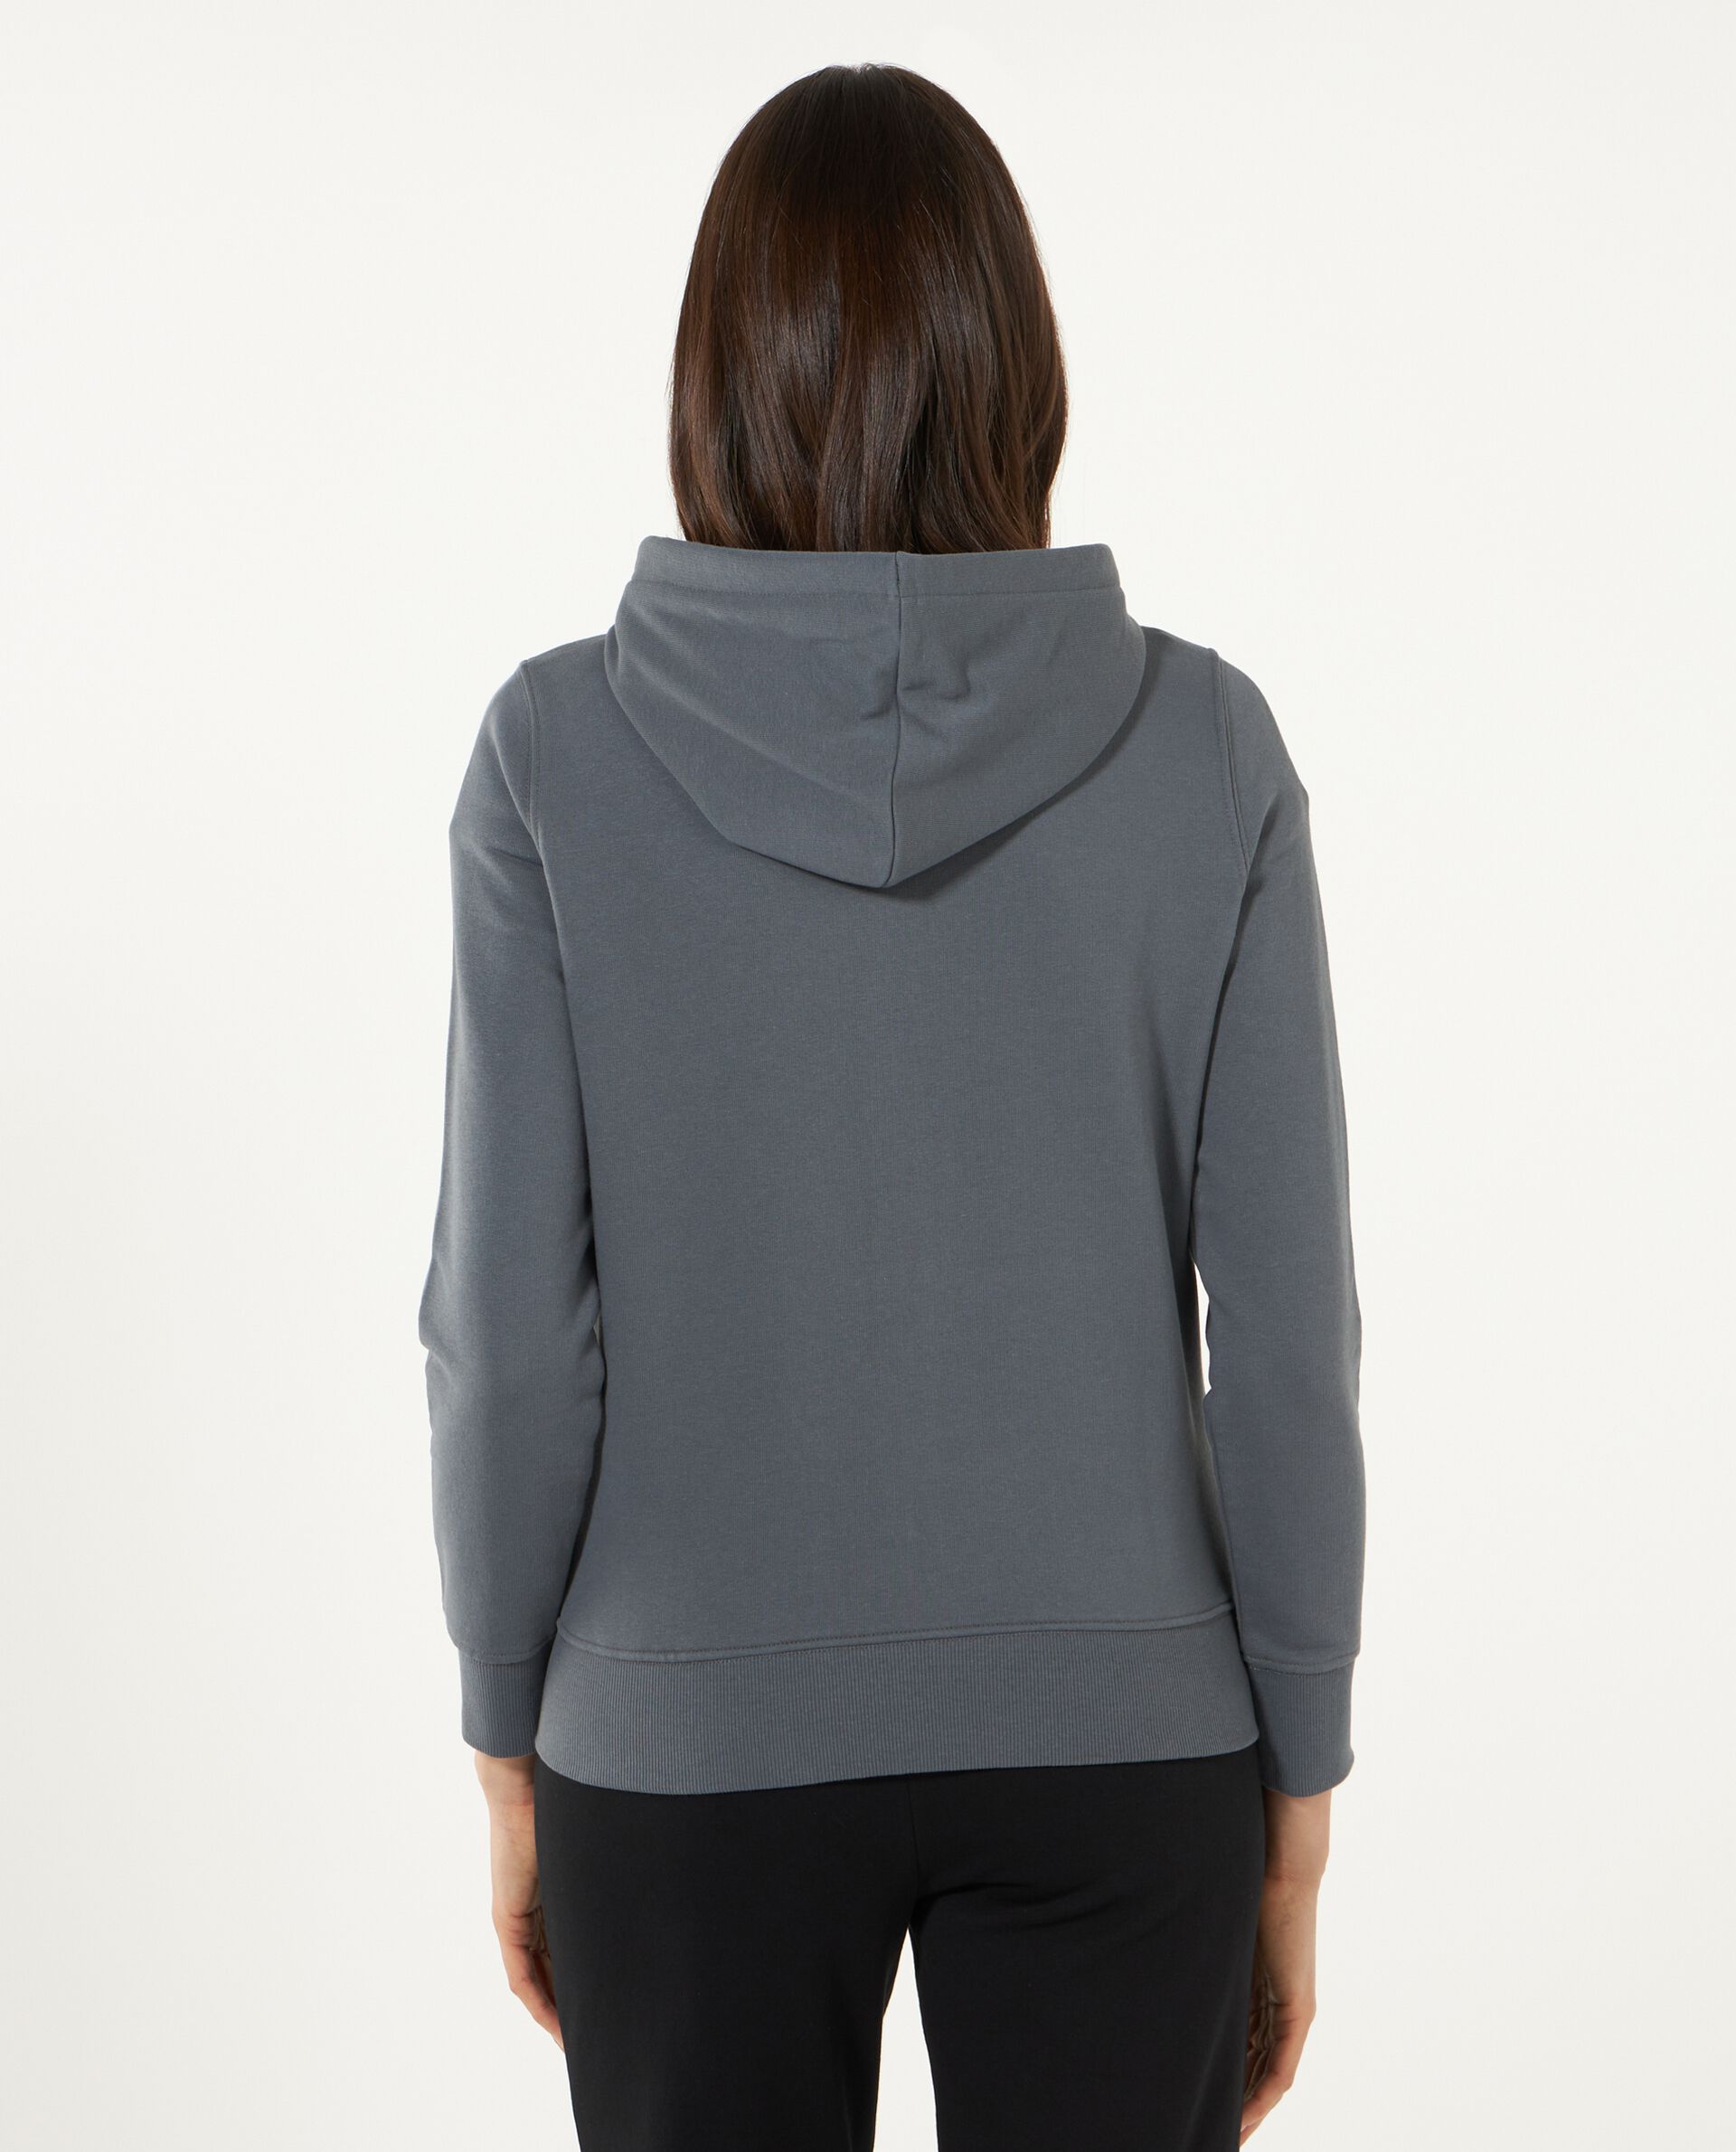 Giacca Holistic fitness full zip donna